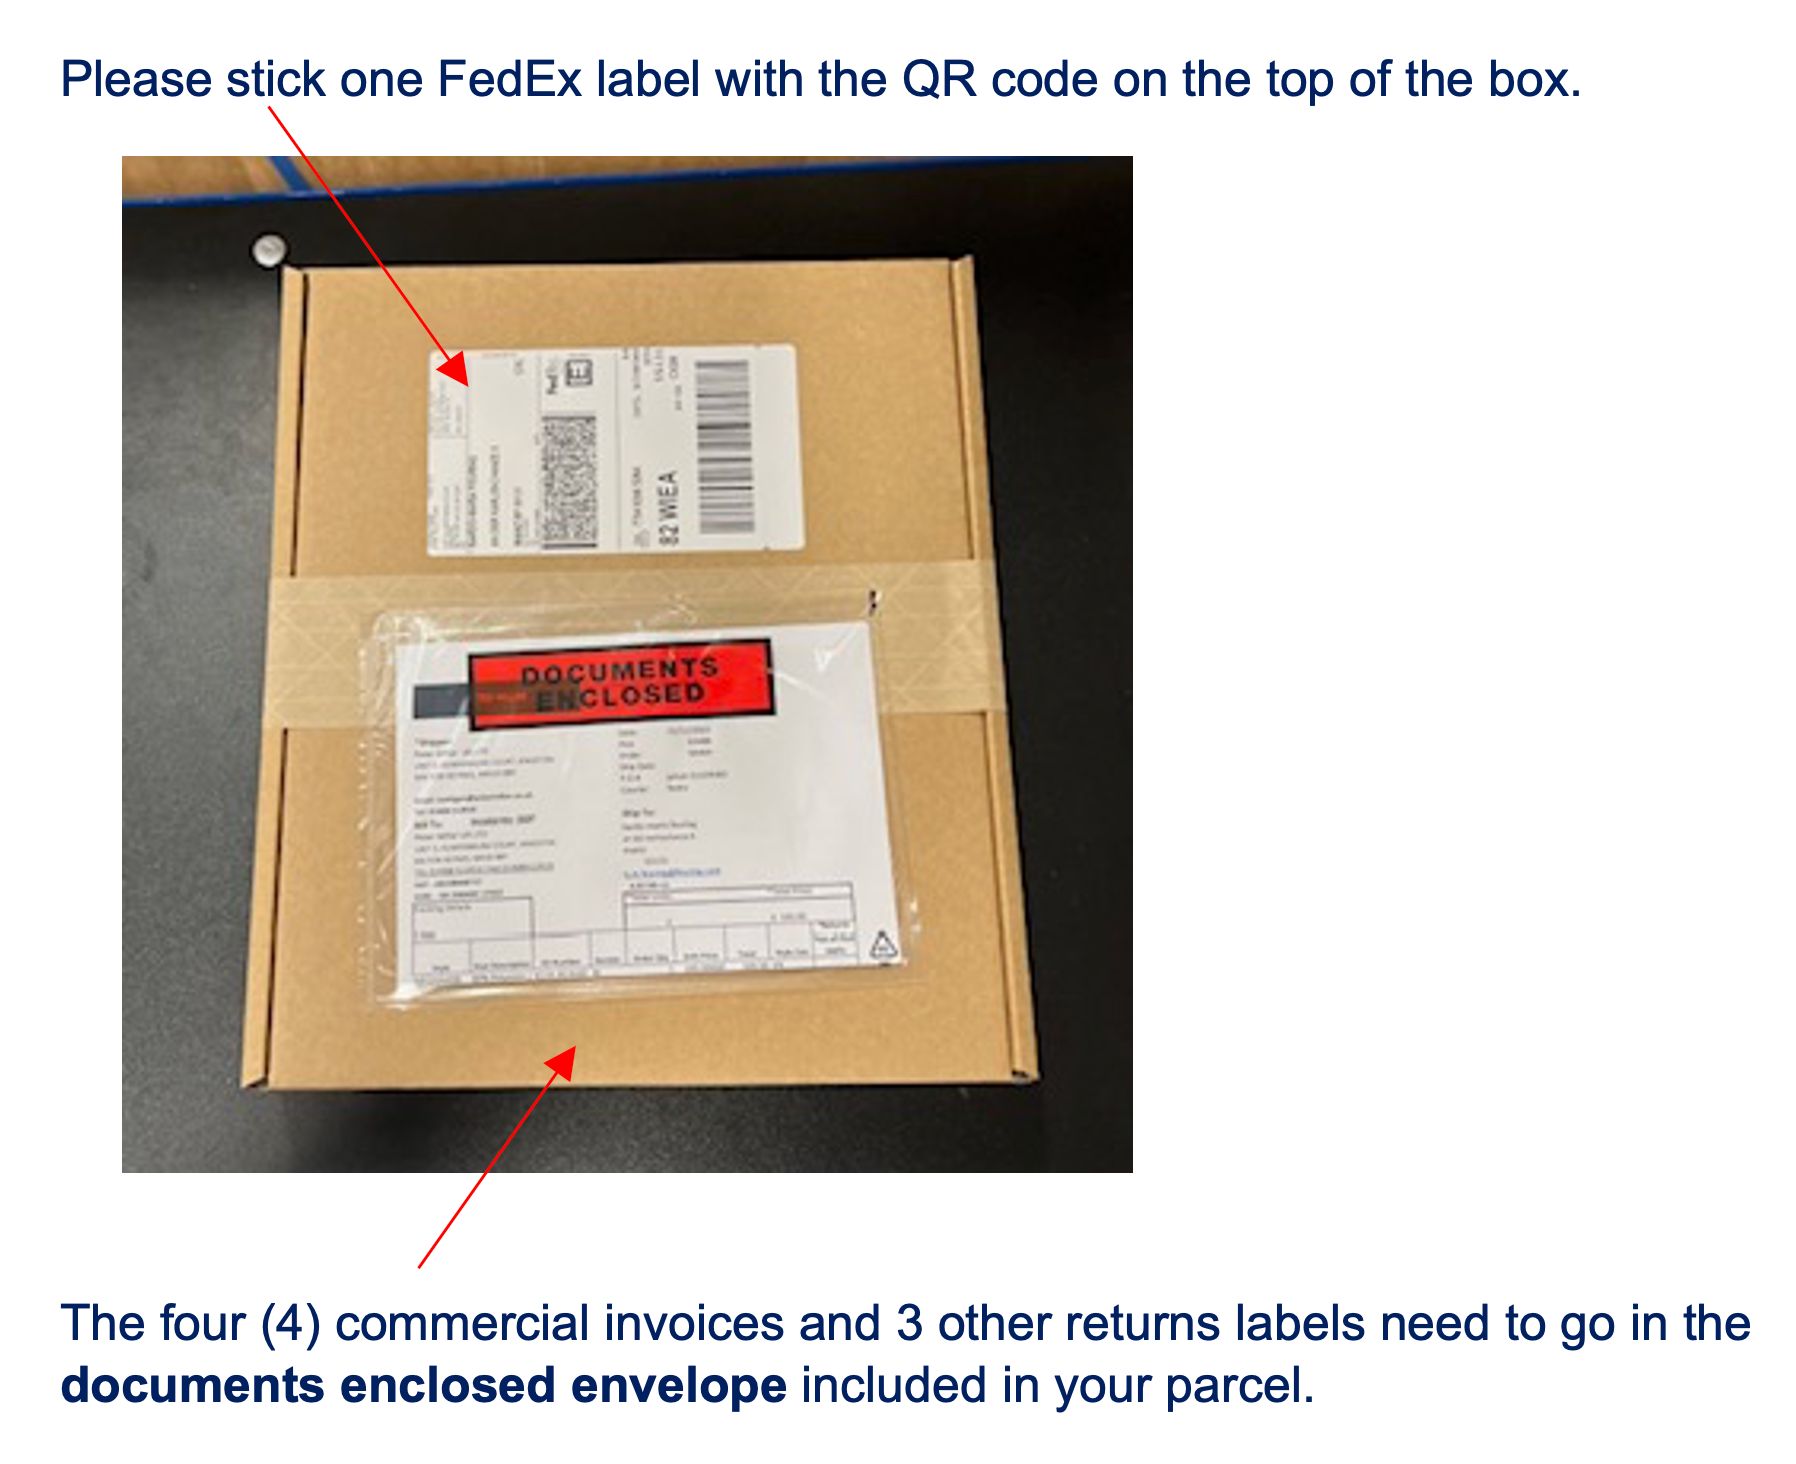 A red arrow pointing to the FedEx label with text that reads: Please stick one FedEx label with the QR code on the top of the box. A second red arrow that points to the Documents enclosed envelope with text that reads: The four (4) commercial invoices and 3 other returns labels need to go in the documents enclosed in your parcel.